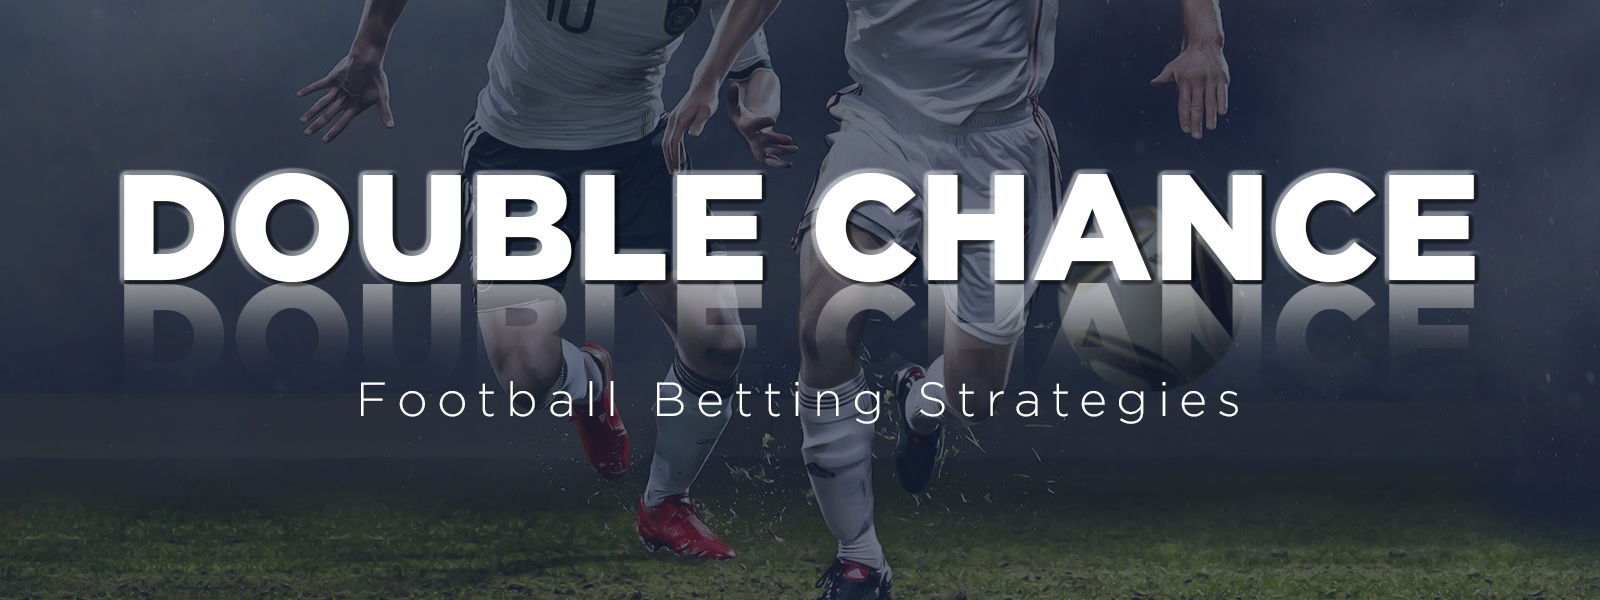 Guide to How Double Chance Betting Works